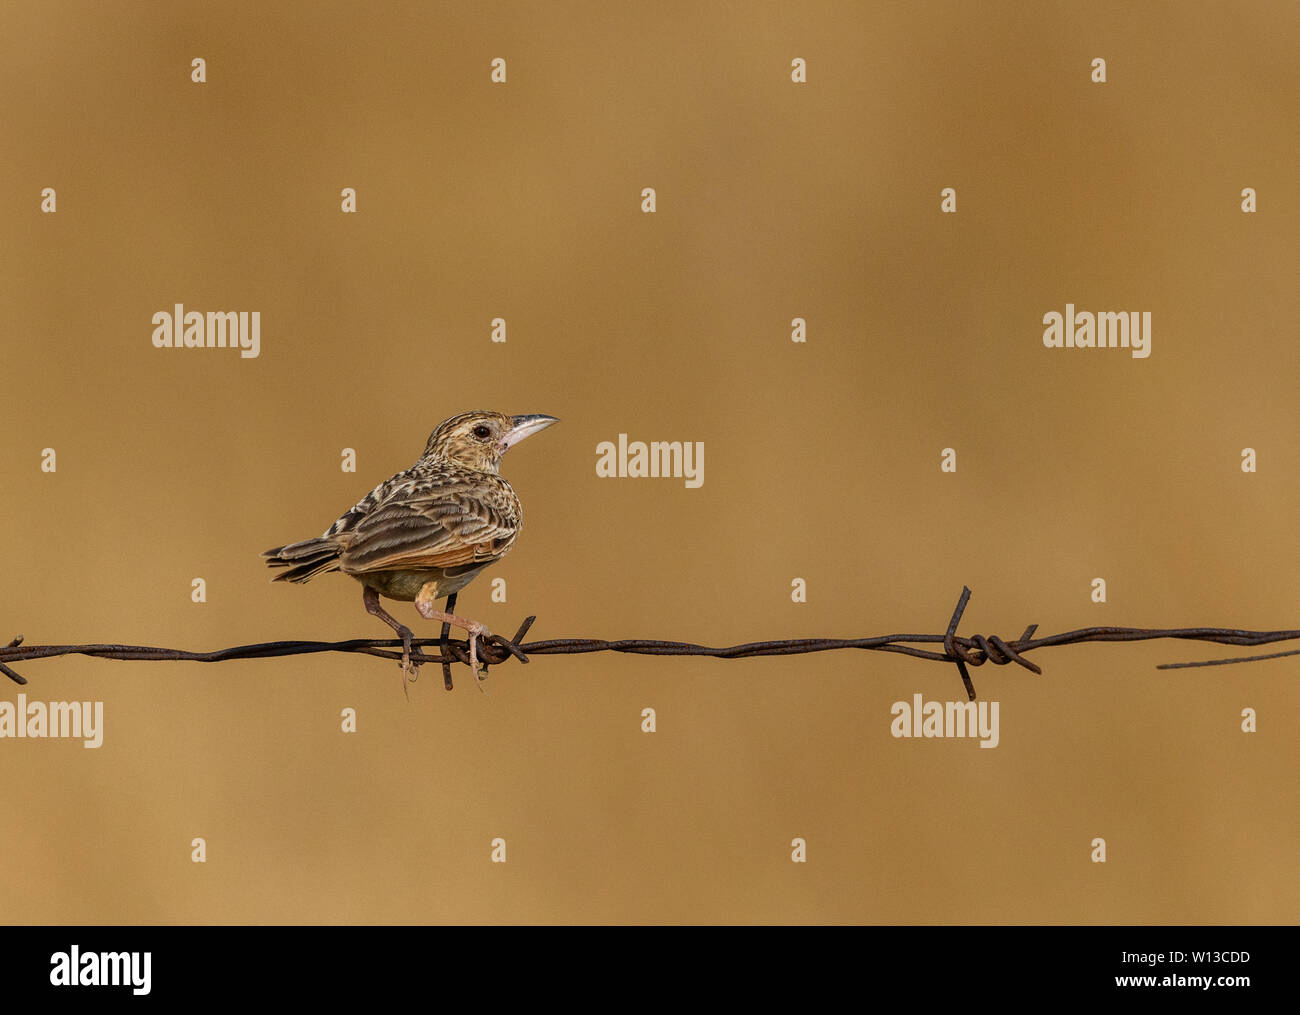 Indian bush lark (Mirafra erythroptera) perched on a rusted boundary spike barbed wiring in koonthankulam, Tamil nadu Stock Photo